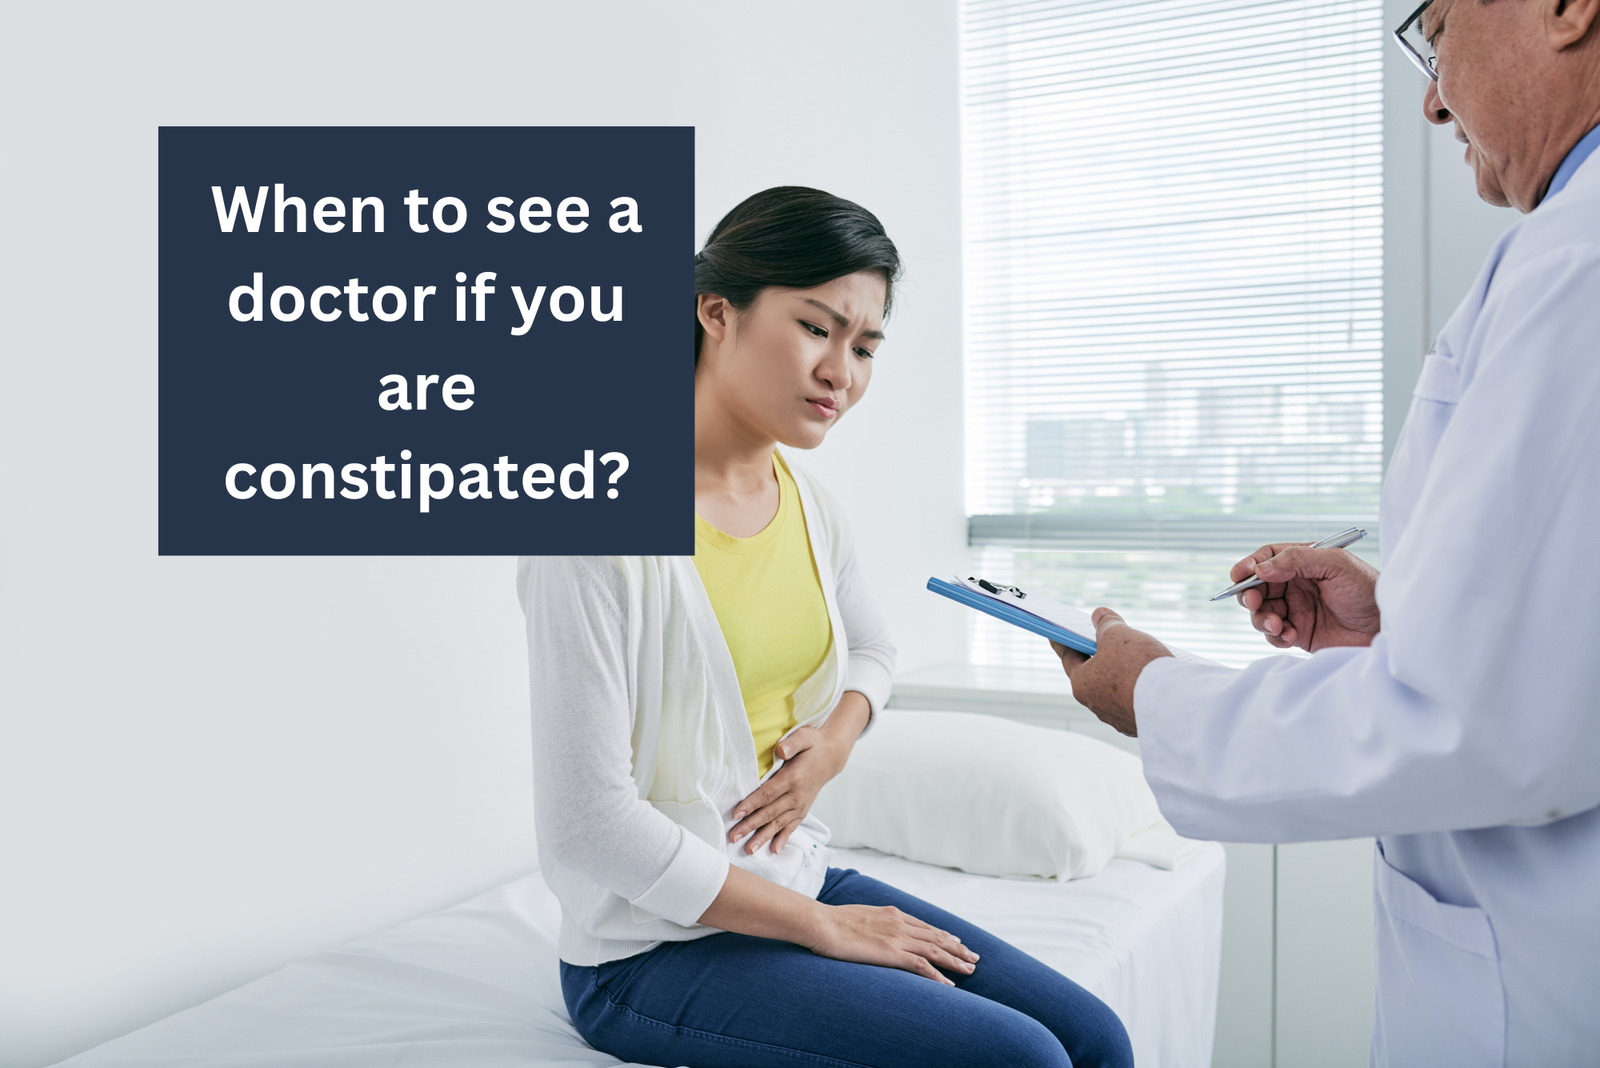 When to see a doctor if you are constipated